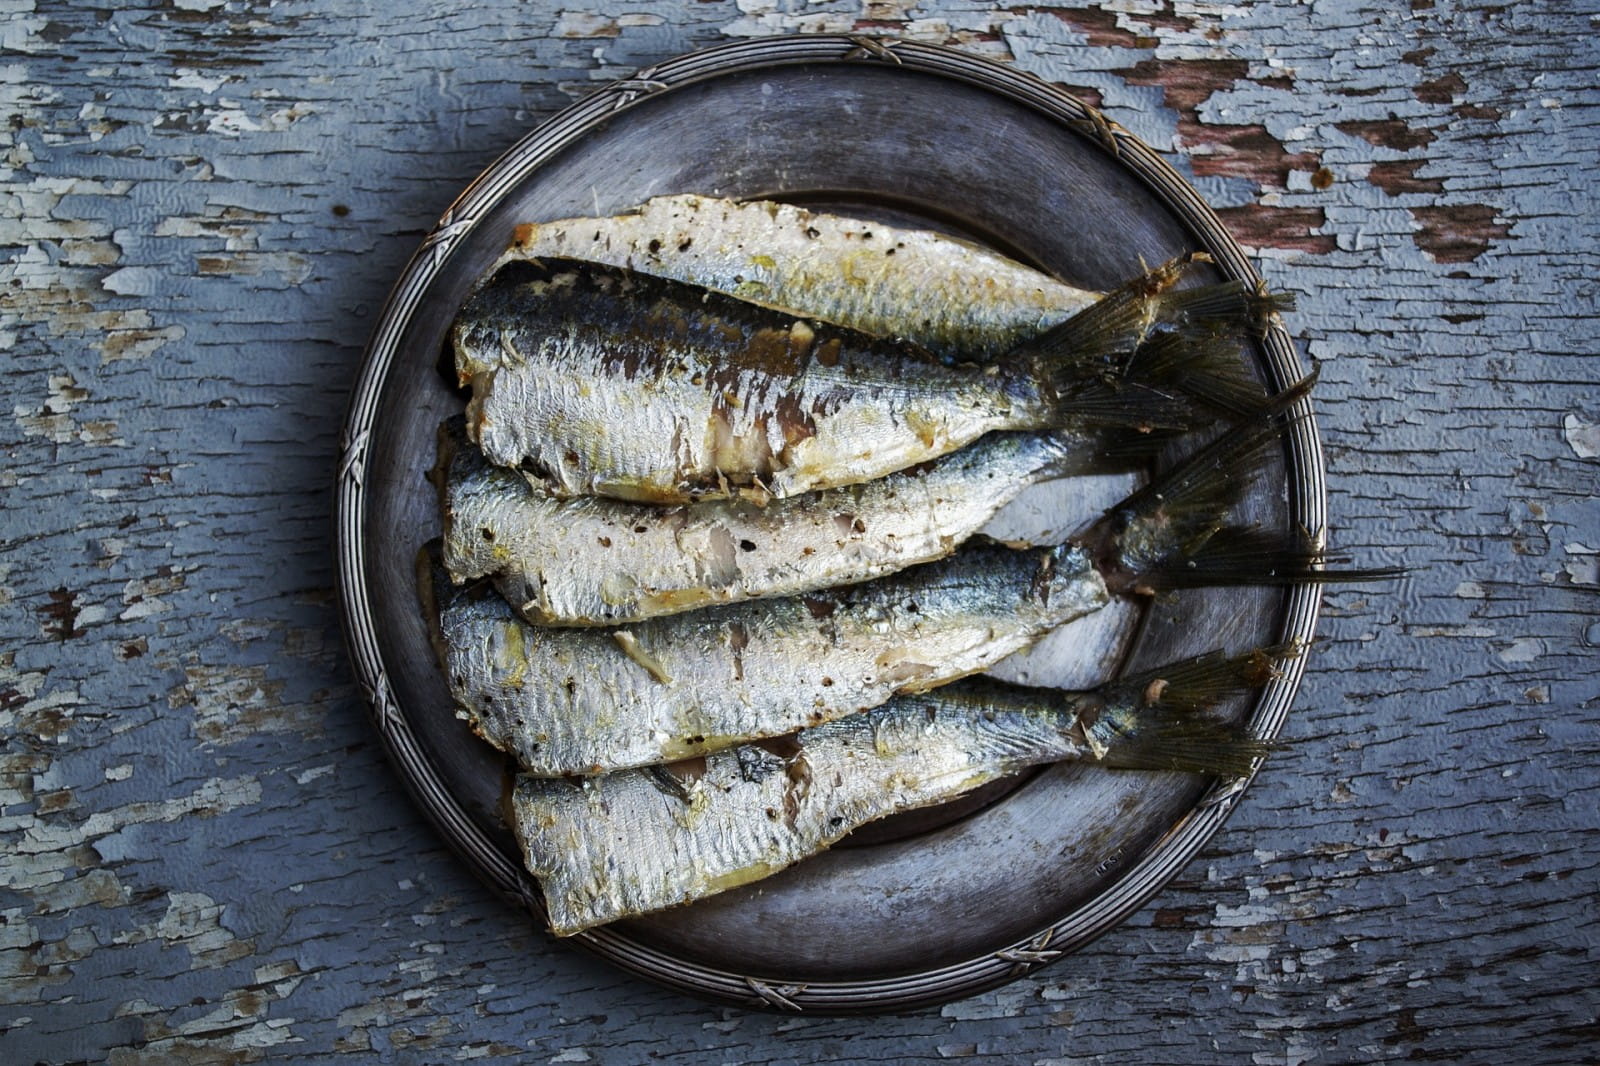 The best wine matches for sardines